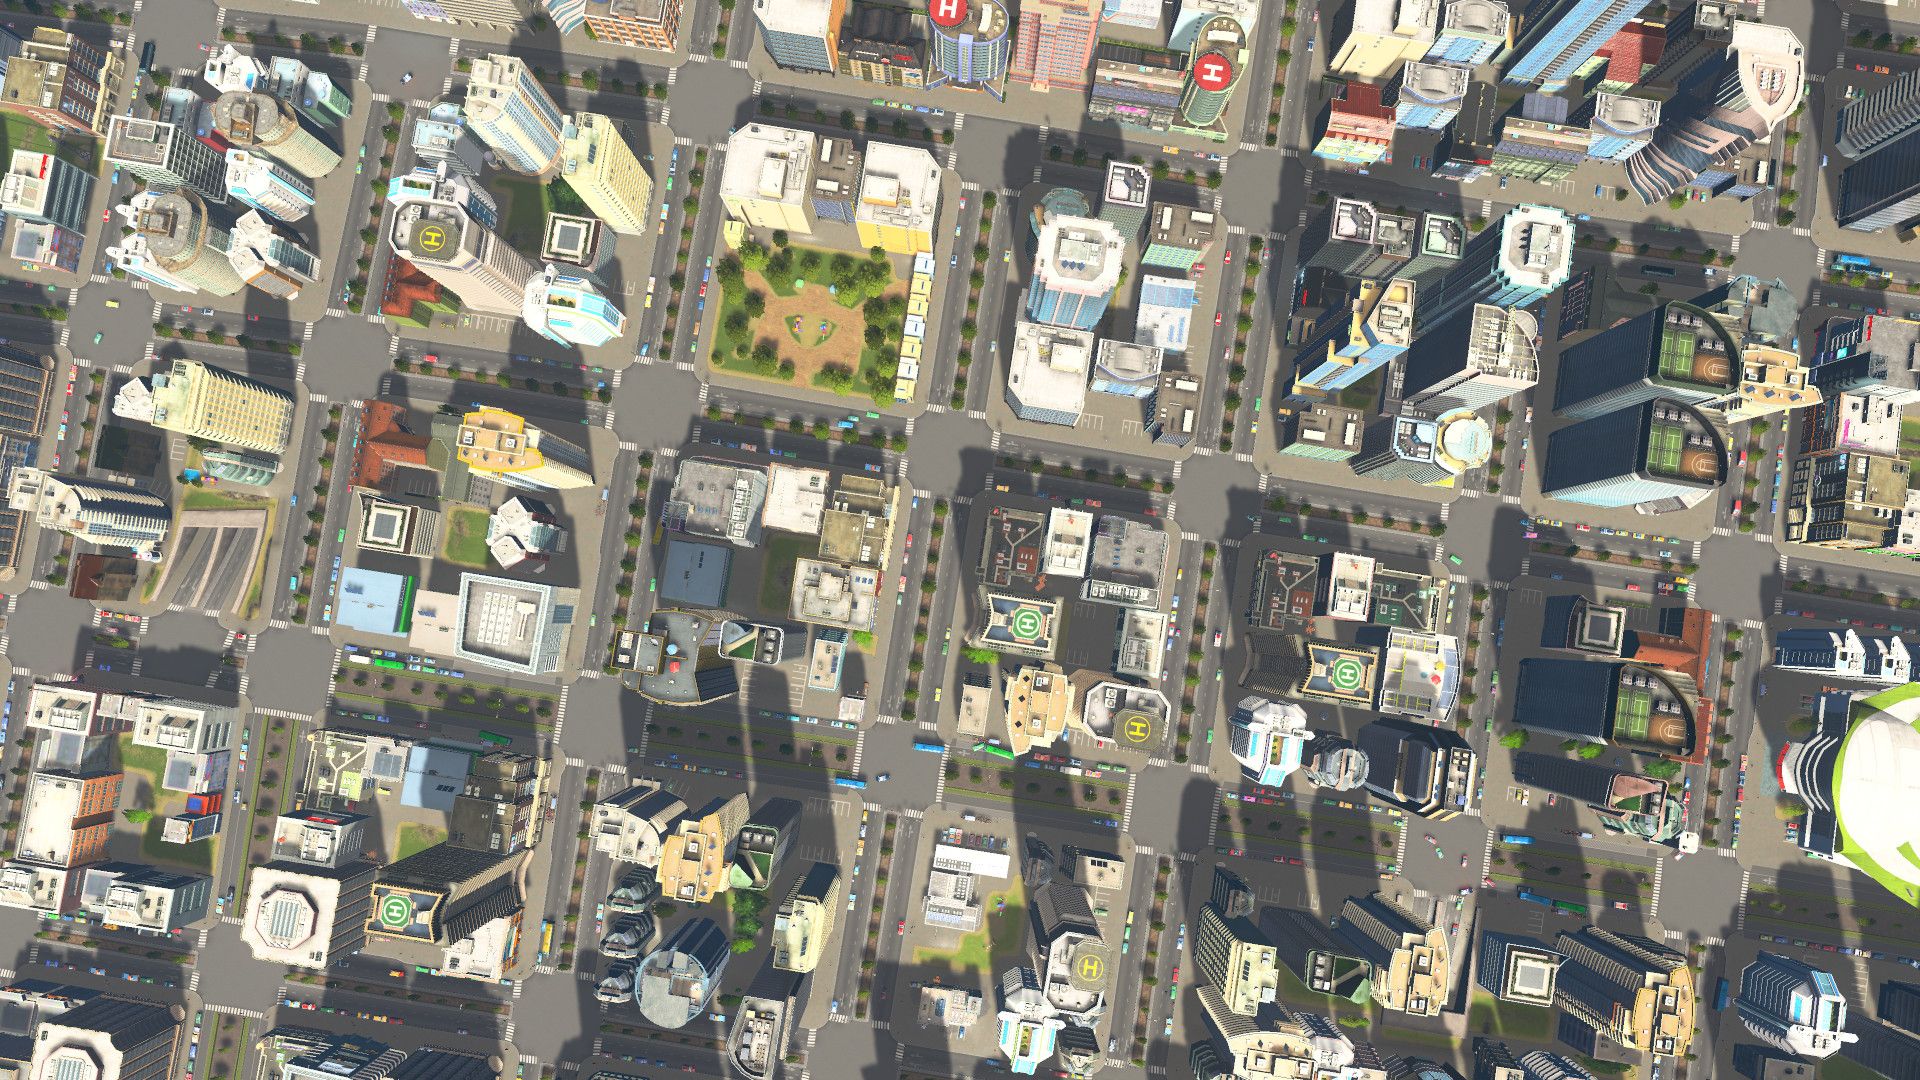 How to Start 2 New Cities in Cities Skylines Multiplayer 